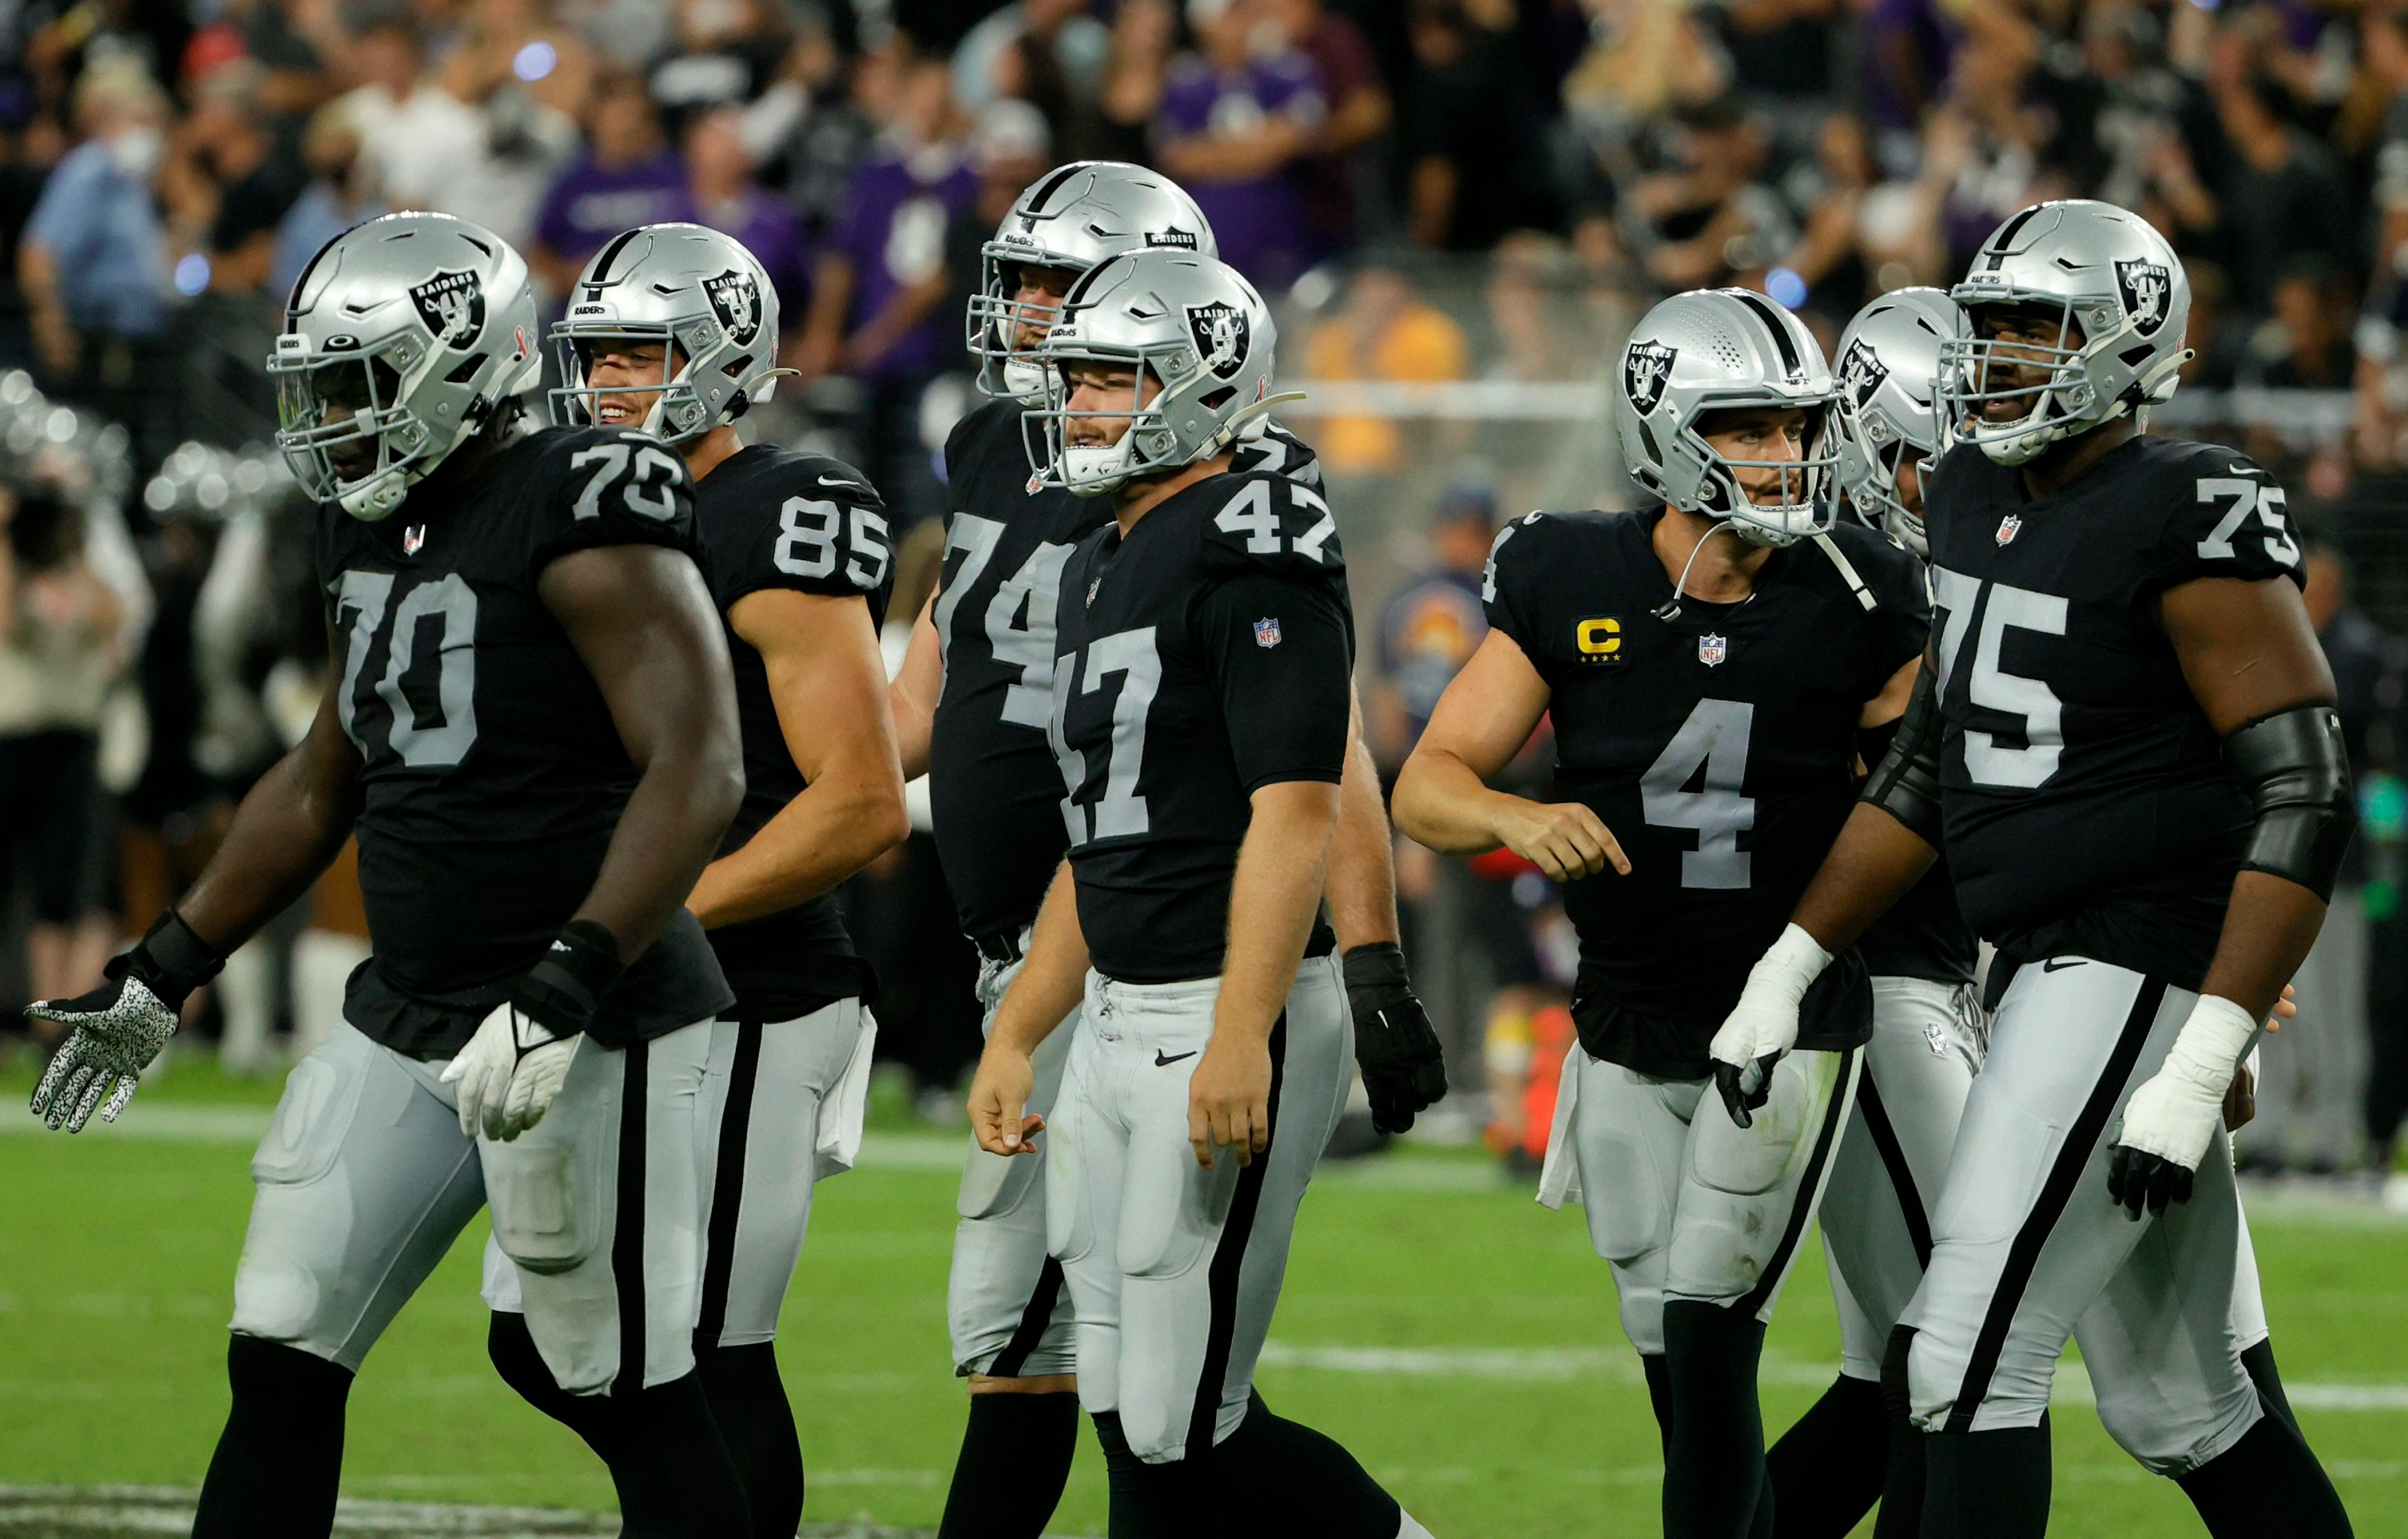 Raiders 2022 twodeep analysis and predictions Offensive line